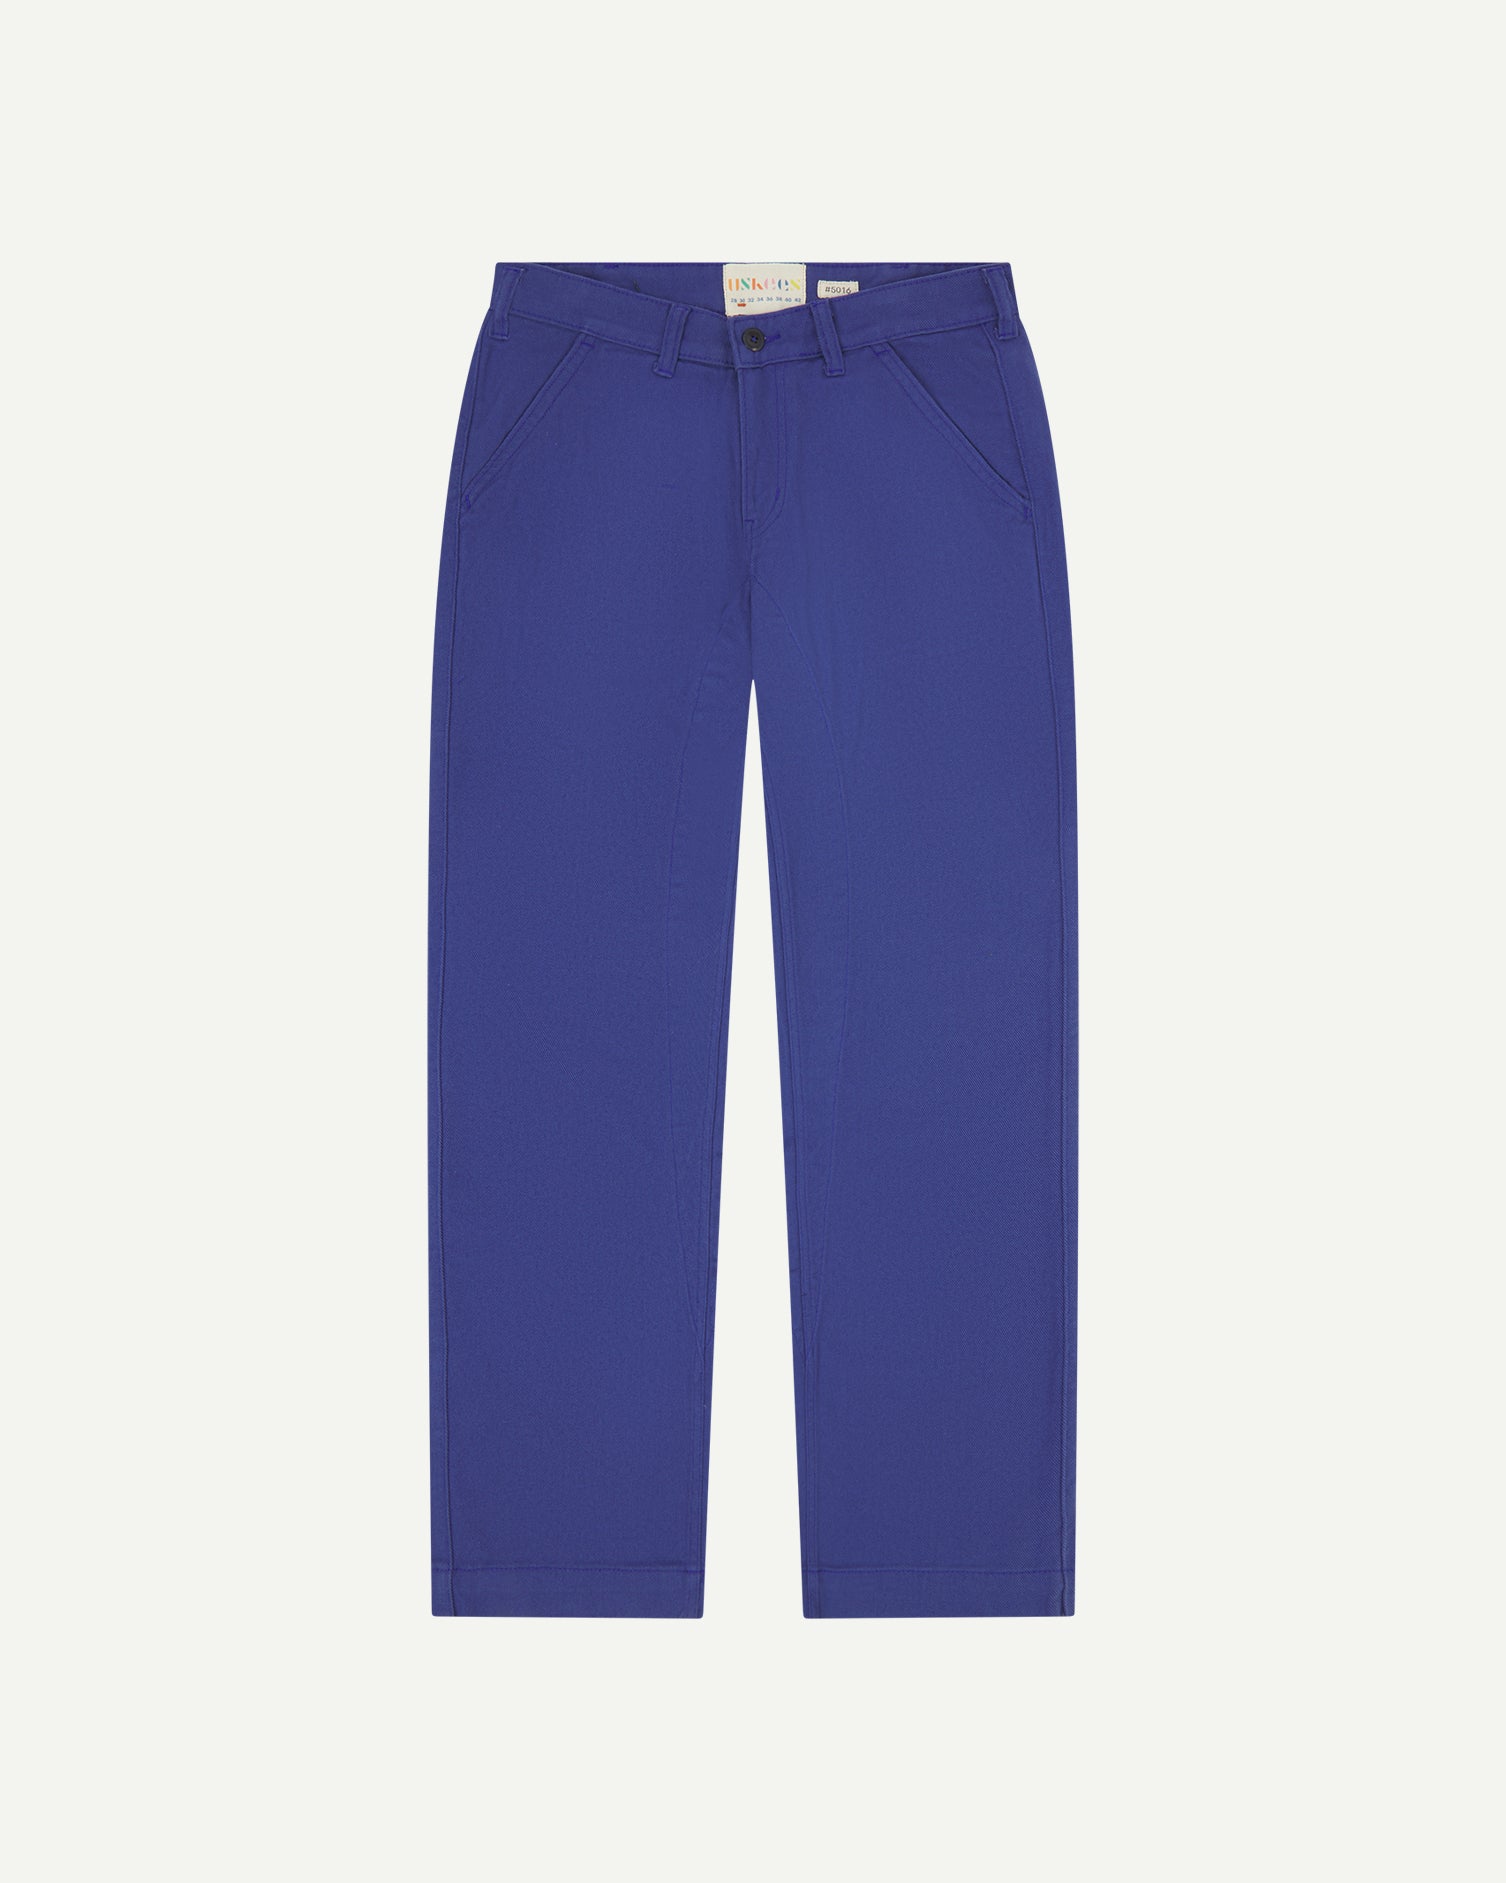 Front flat shot of Uskees cotton drill 'commuter' trousers for men in ultra blue showing brand label at waist